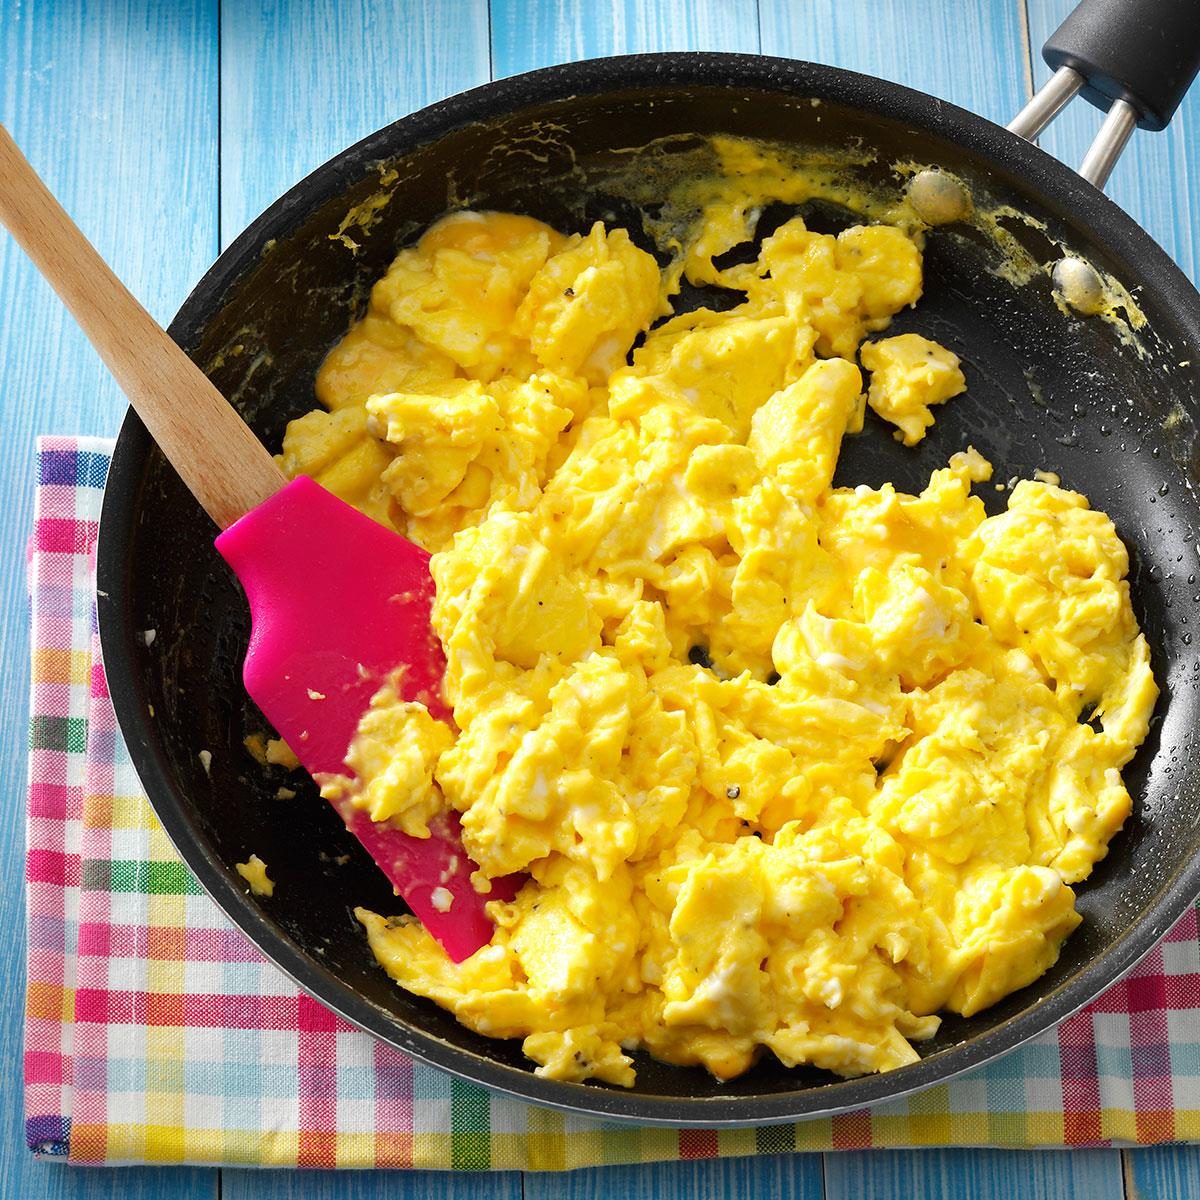 https://www.tasteofhome.com/wp-content/uploads/2017/10/Fluffy-Scrambled-Eggs_exps12235_SD143206C04_08_3bC_RMS-3.jpg?fit=700%2C700